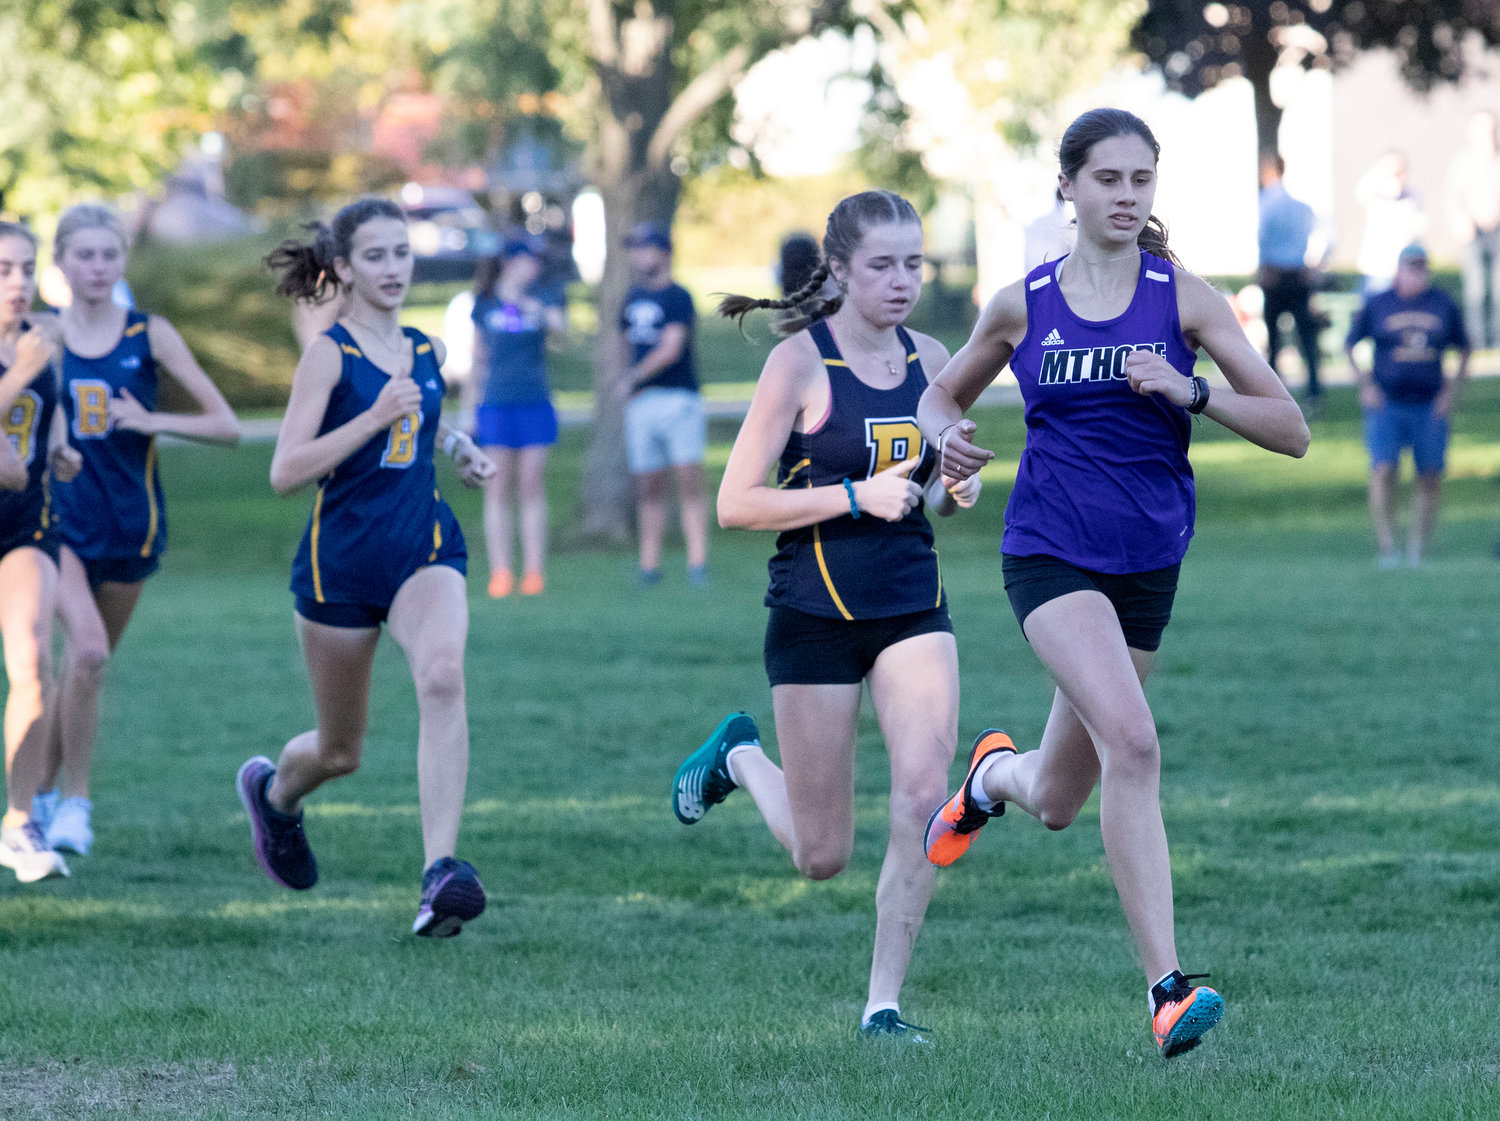 Huskies freshman phenom Jessica Deal sprints past the field at the start of the cross country team’s meet against Lincoln School, Barrington and Moses Brown. Deal won the meet with a time of 19:17.